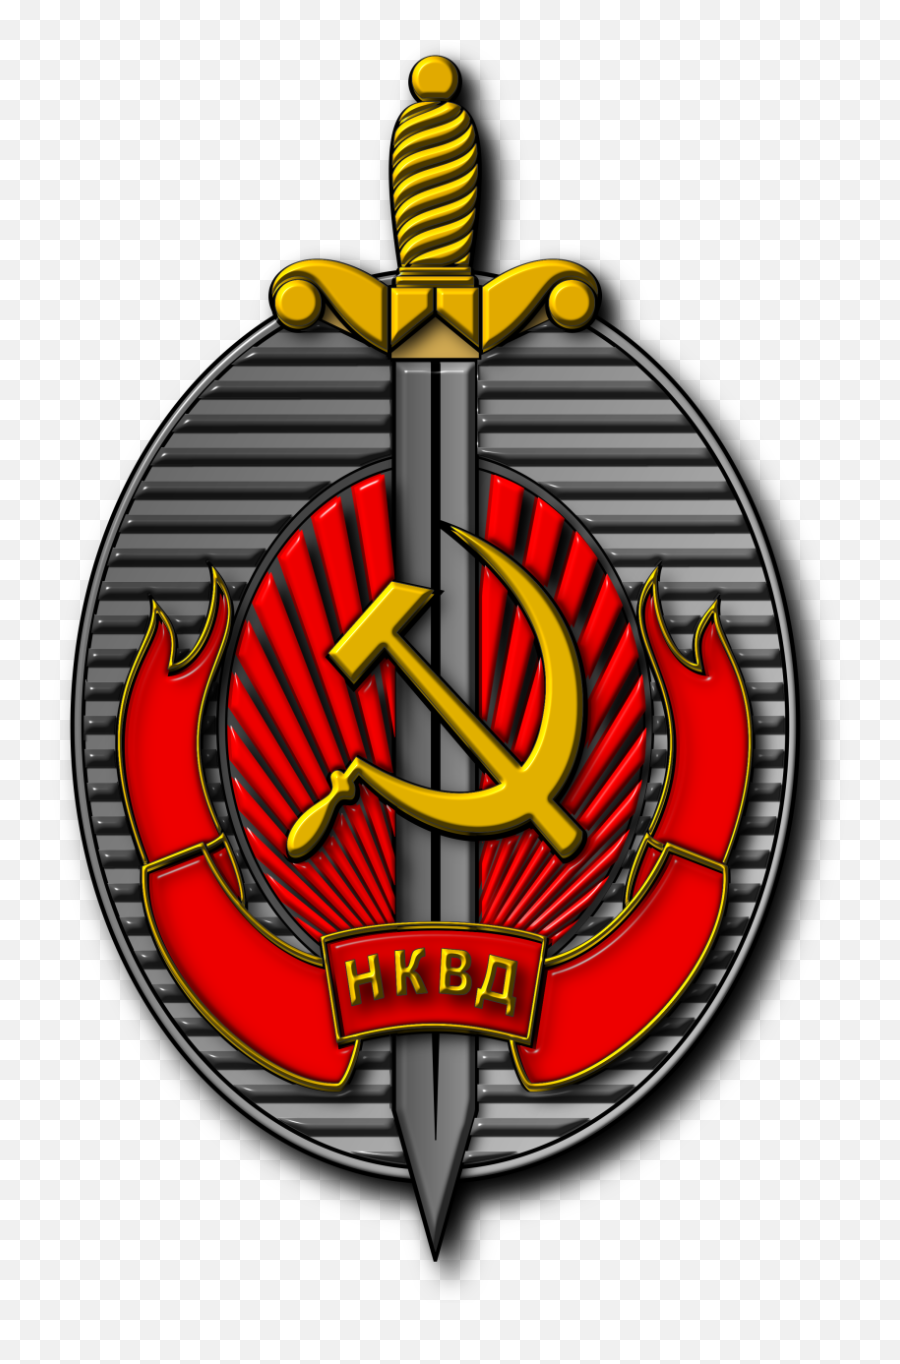 Why Did The Ussr Keep Changing The Name Of Its Secret Police - Nkvd Logo Emoji,Ussr Logo